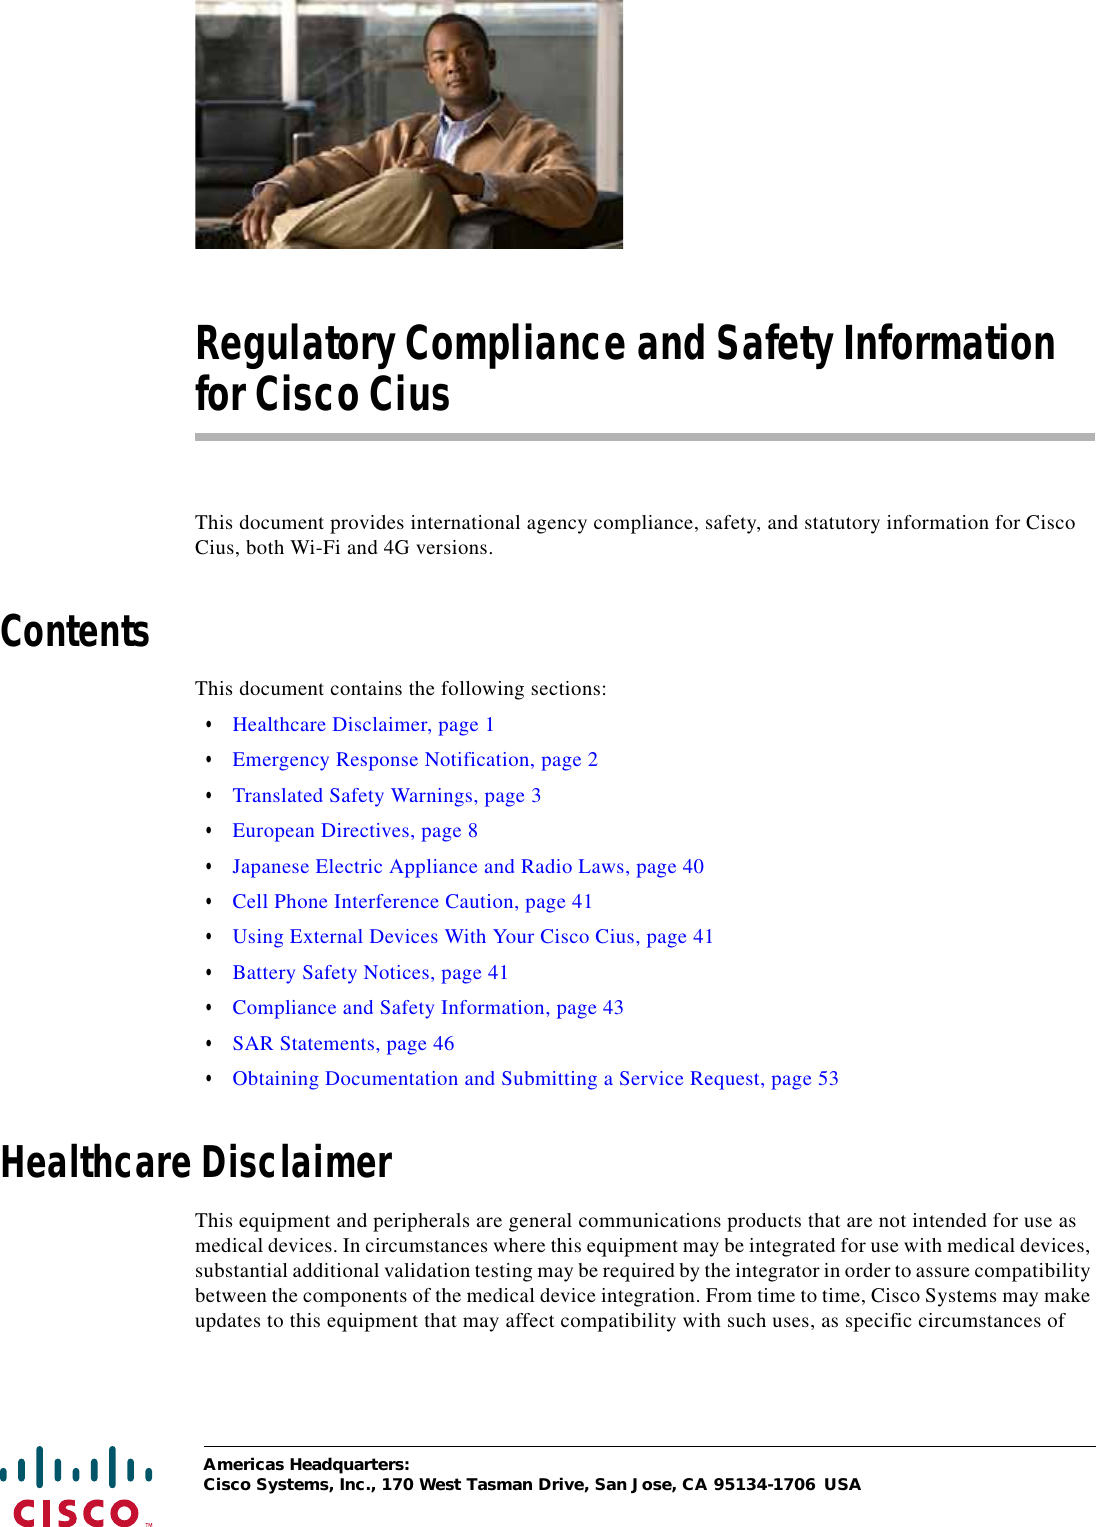  Americas Headquarters:Cisco Systems, Inc., 170 West Tasman Drive, San Jose, CA 95134-1706 USARegulatory Compliance and Safety Information for Cisco CiusThis document provides international agency compliance, safety, and statutory information for Cisco Cius, both Wi-Fi and 4G versions.ContentsThis document contains the following sections: • Healthcare Disclaimer, page 1 • Emergency Response Notification, page 2 • Translated Safety Warnings, page 3 • European Directives, page 8 • Japanese Electric Appliance and Radio Laws, page 40 • Cell Phone Interference Caution, page 41 • Using External Devices With Your Cisco Cius, page 41 • Battery Safety Notices, page 41 • Compliance and Safety Information, page 43 • SAR Statements, page 46 • Obtaining Documentation and Submitting a Service Request, page 53Healthcare DisclaimerThis equipment and peripherals are general communications products that are not intended for use as medical devices. In circumstances where this equipment may be integrated for use with medical devices, substantial additional validation testing may be required by the integrator in order to assure compatibility between the components of the medical device integration. From time to time, Cisco Systems may make updates to this equipment that may affect compatibility with such uses, as specific circumstances of 